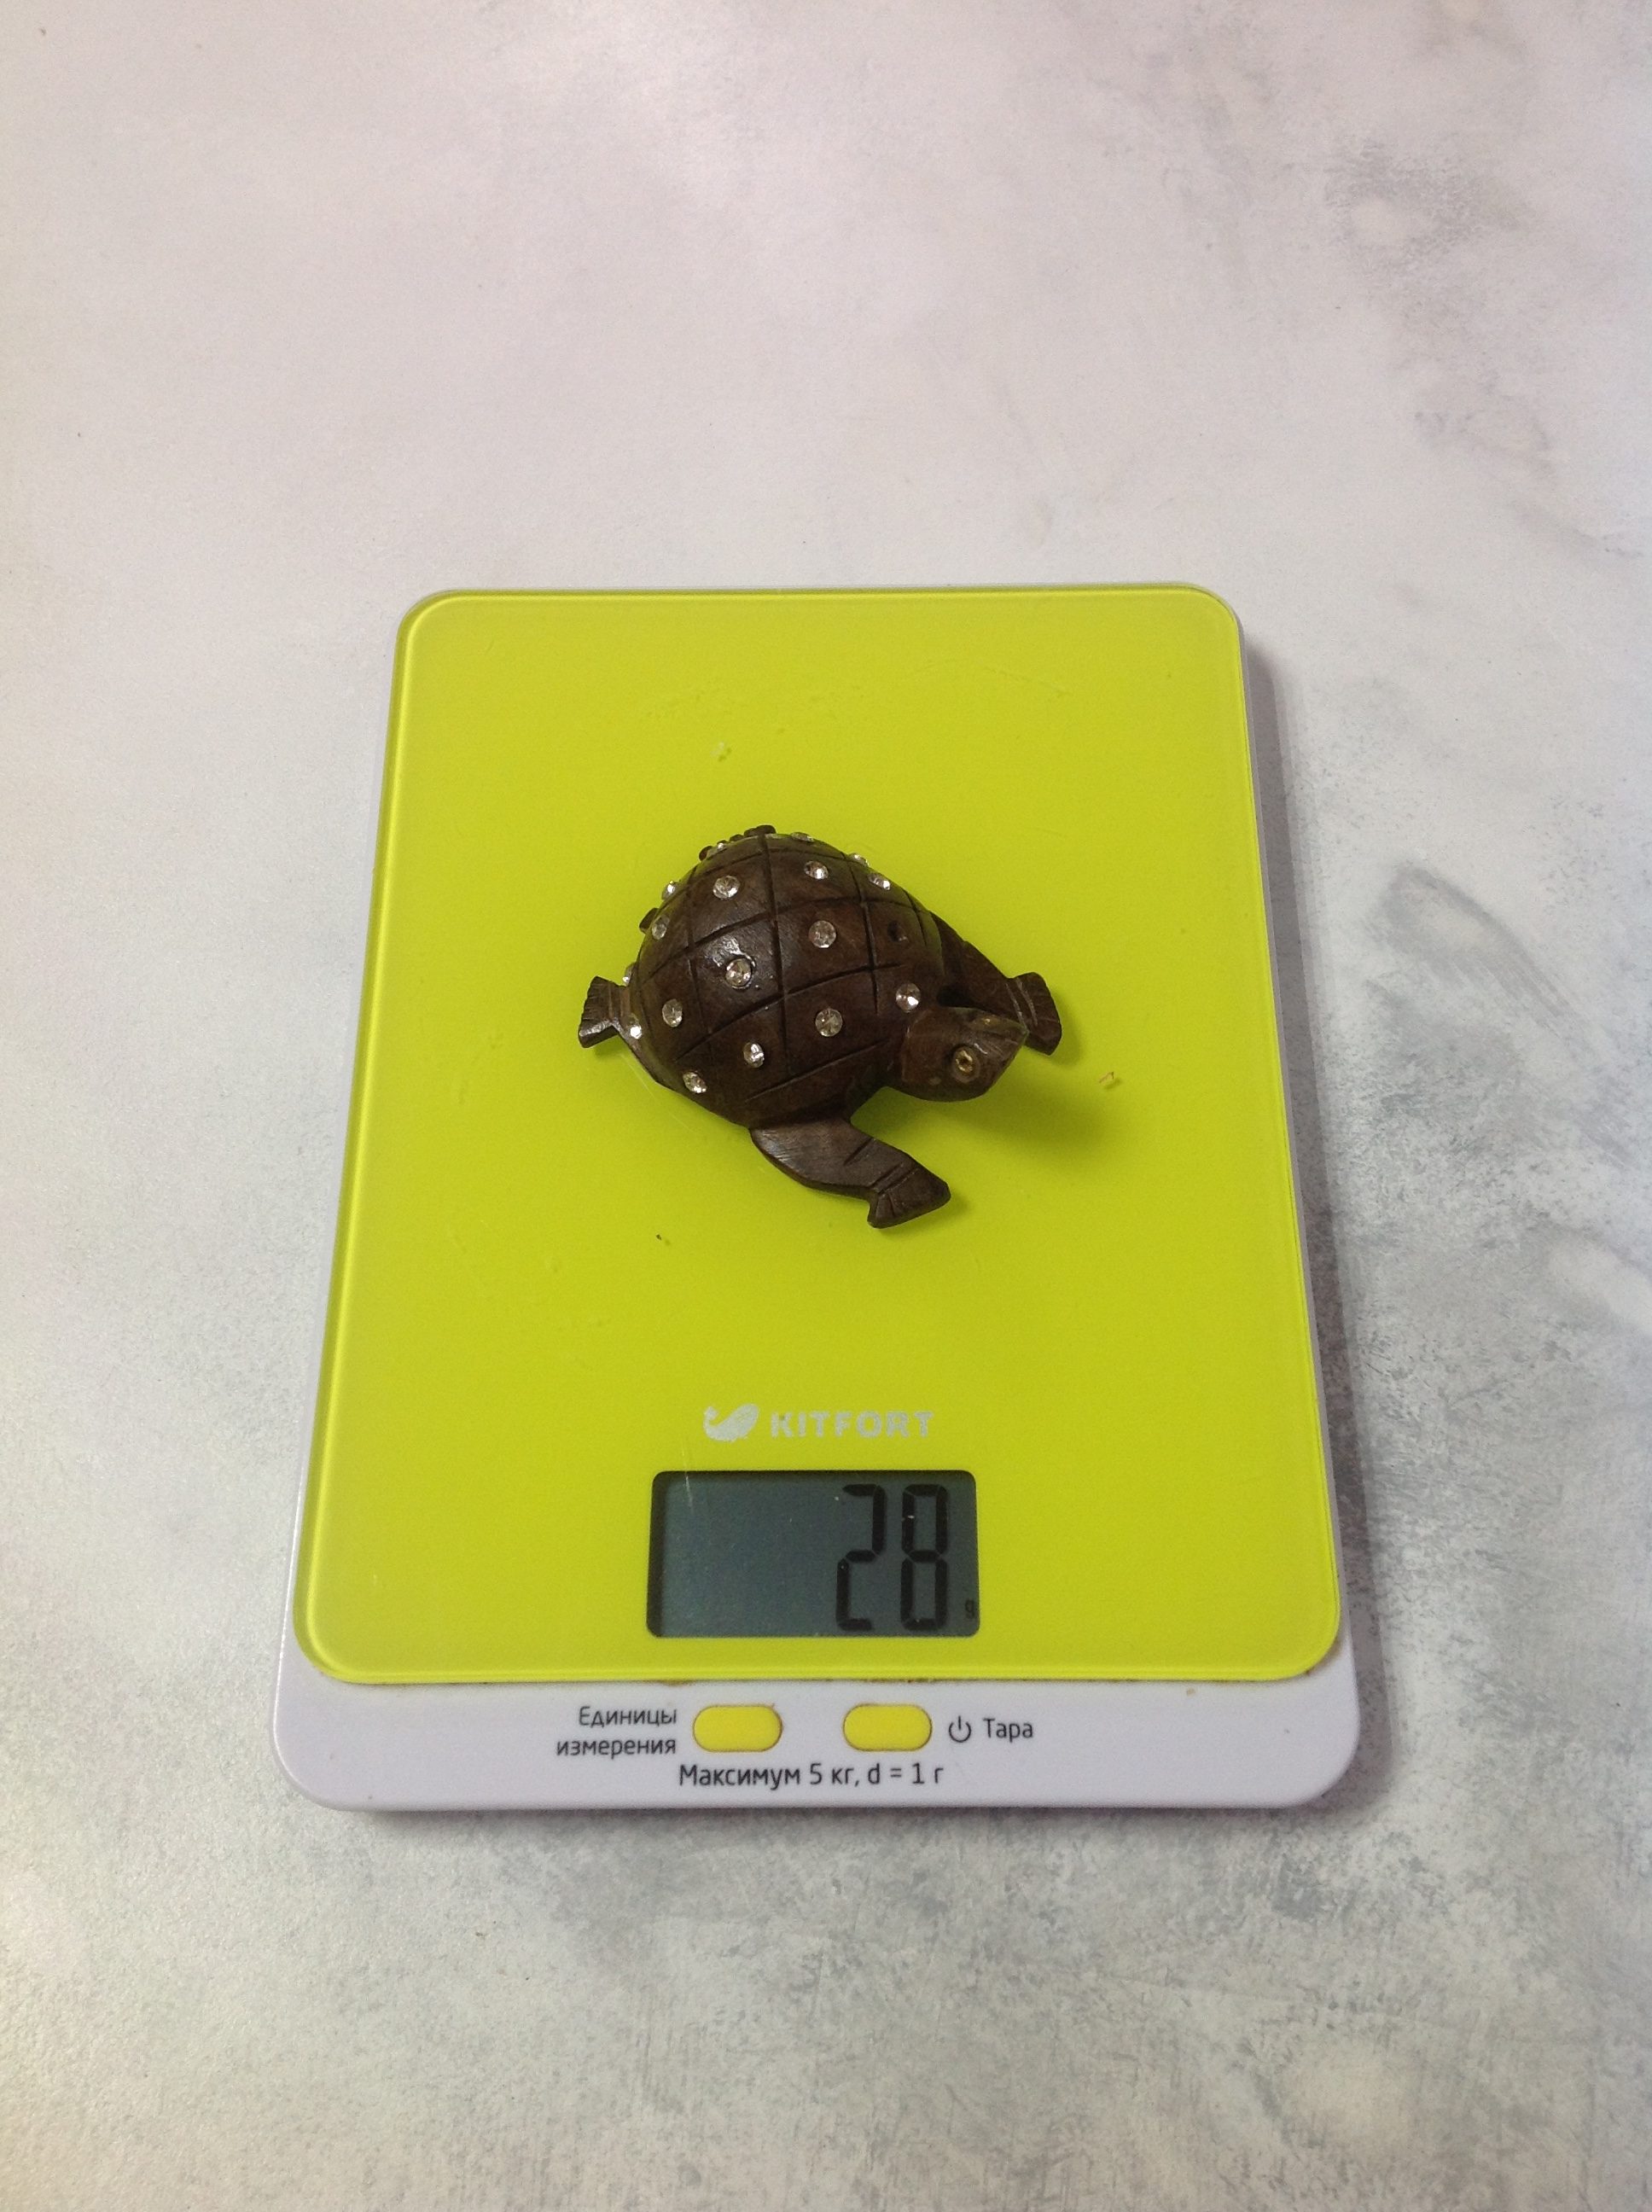 How much does a small wooden souvenir turtle weigh?